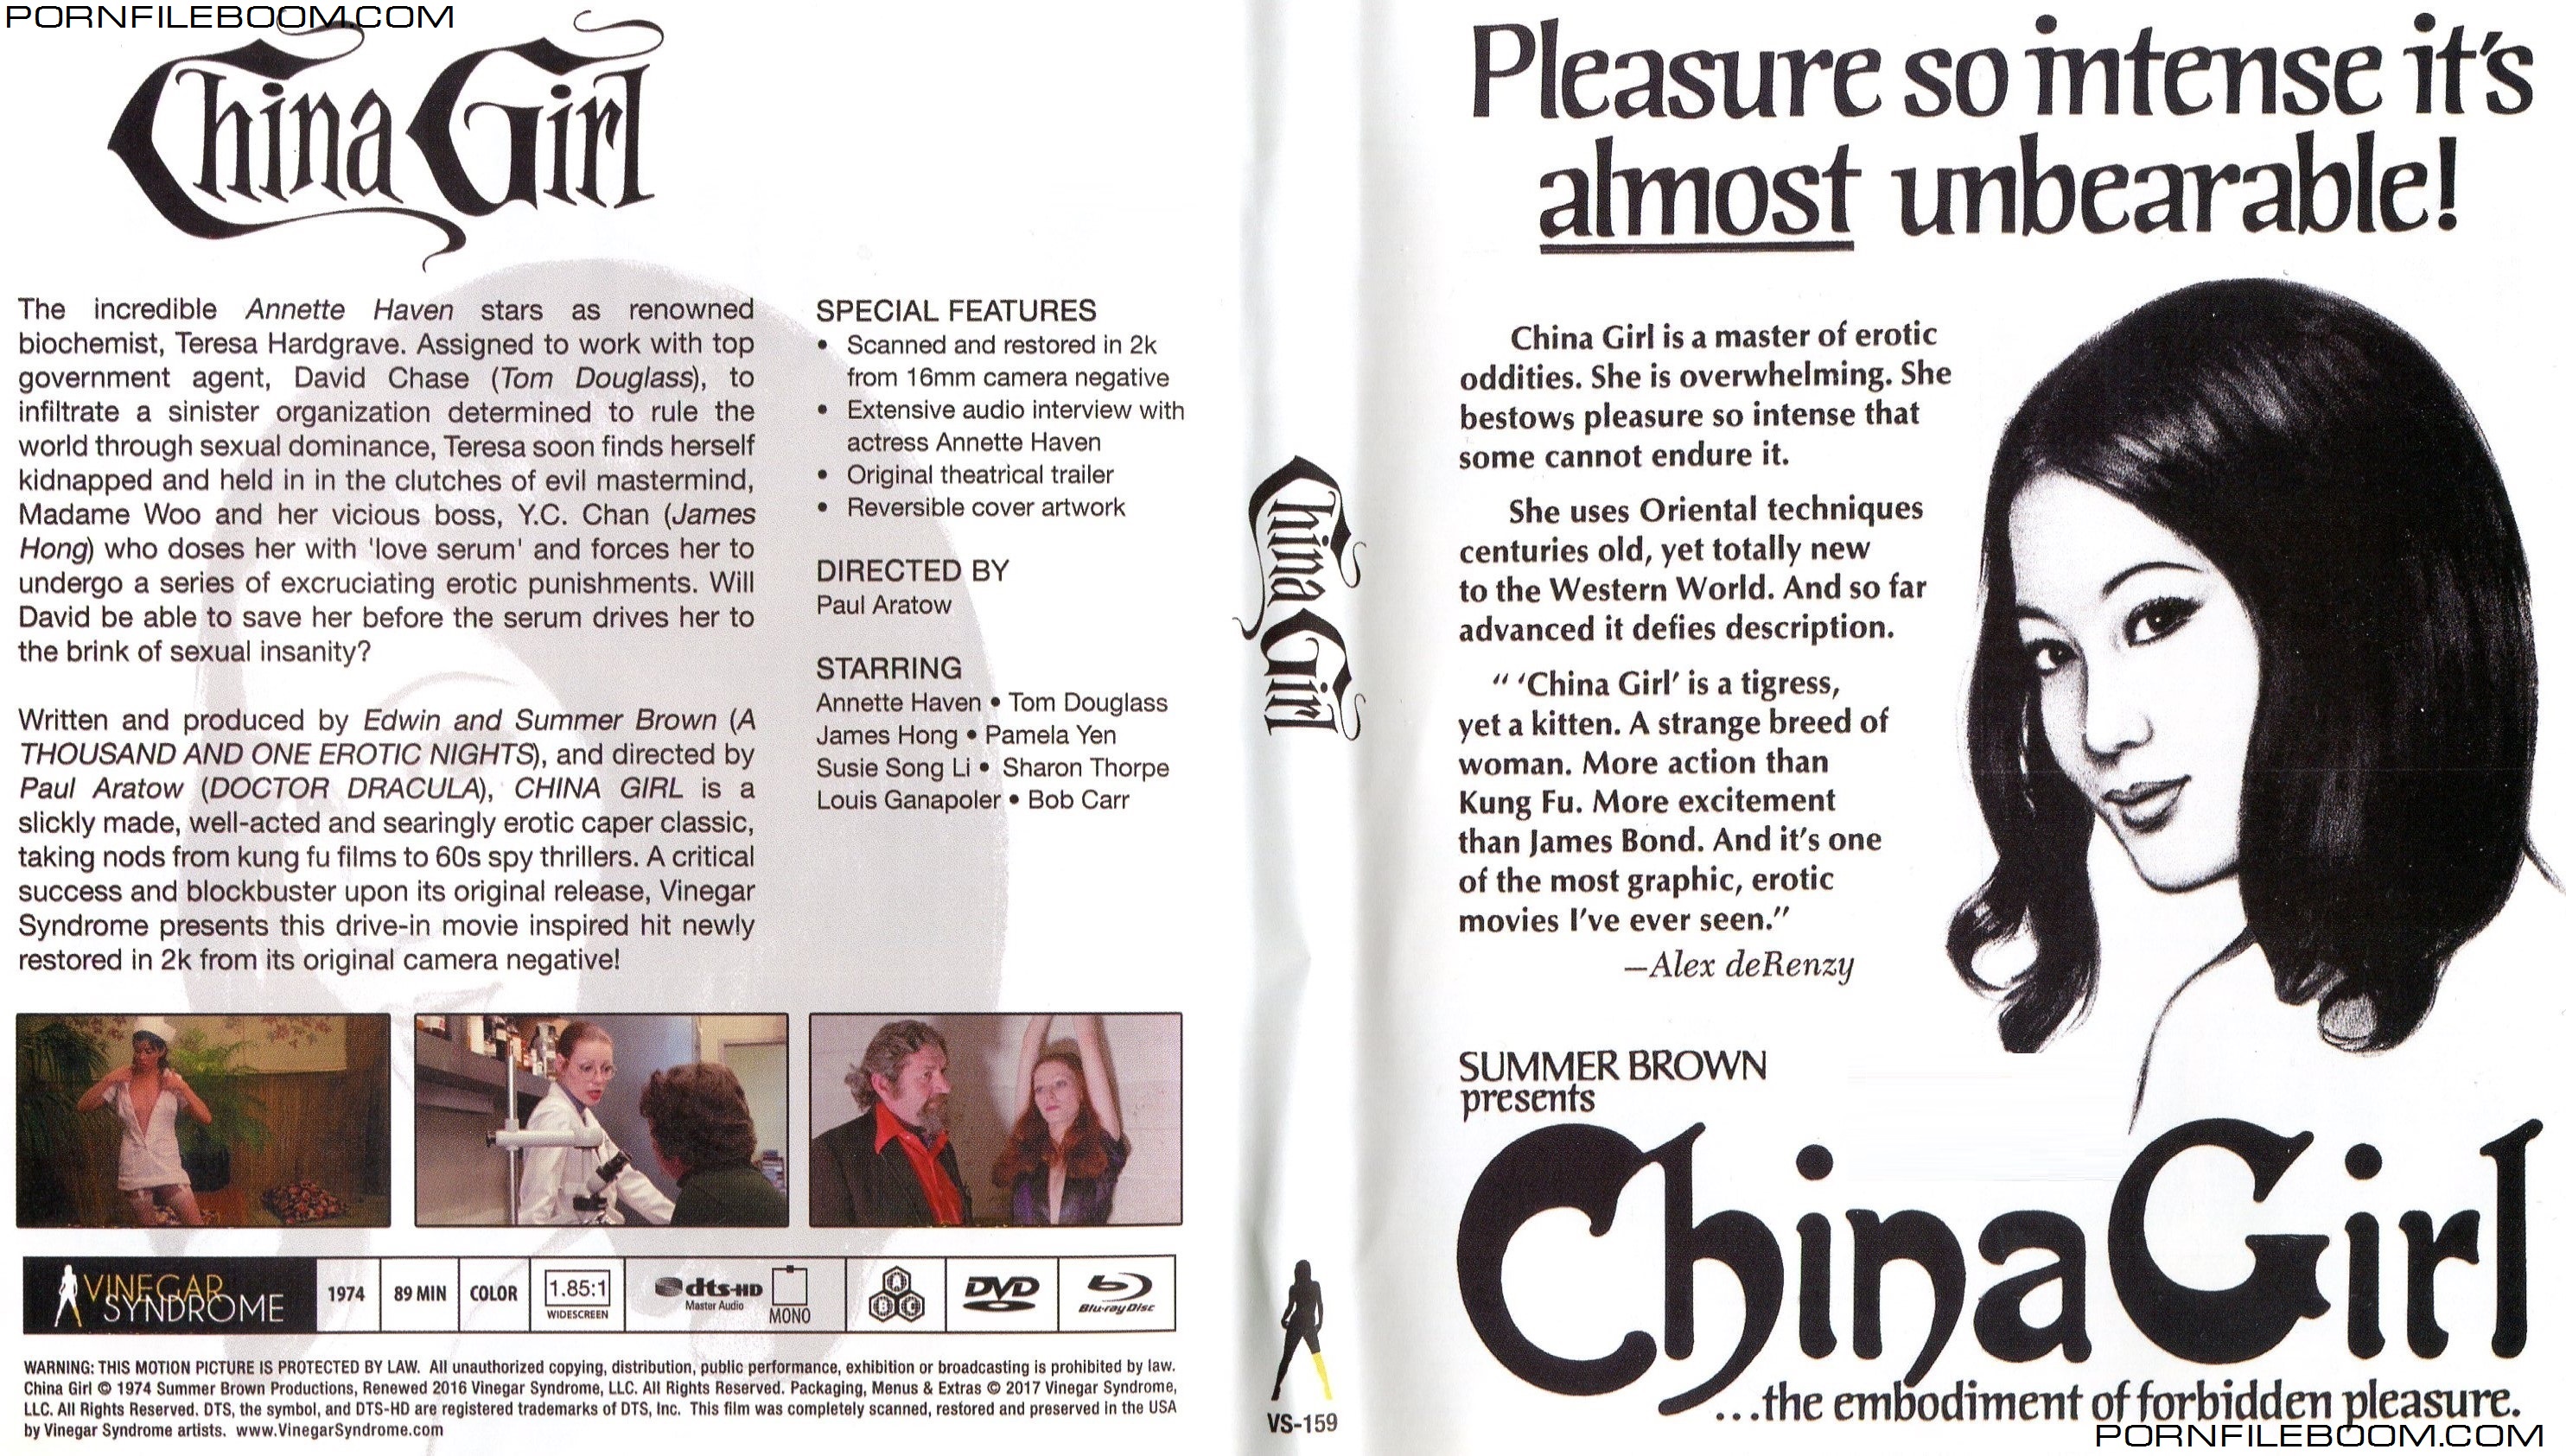 China Girl  (Paul Aratow (as Paolo Uccello), Summer Brown Productions / Vinegar Syndrome) [1974, All Sex,Classic, DVDRip]